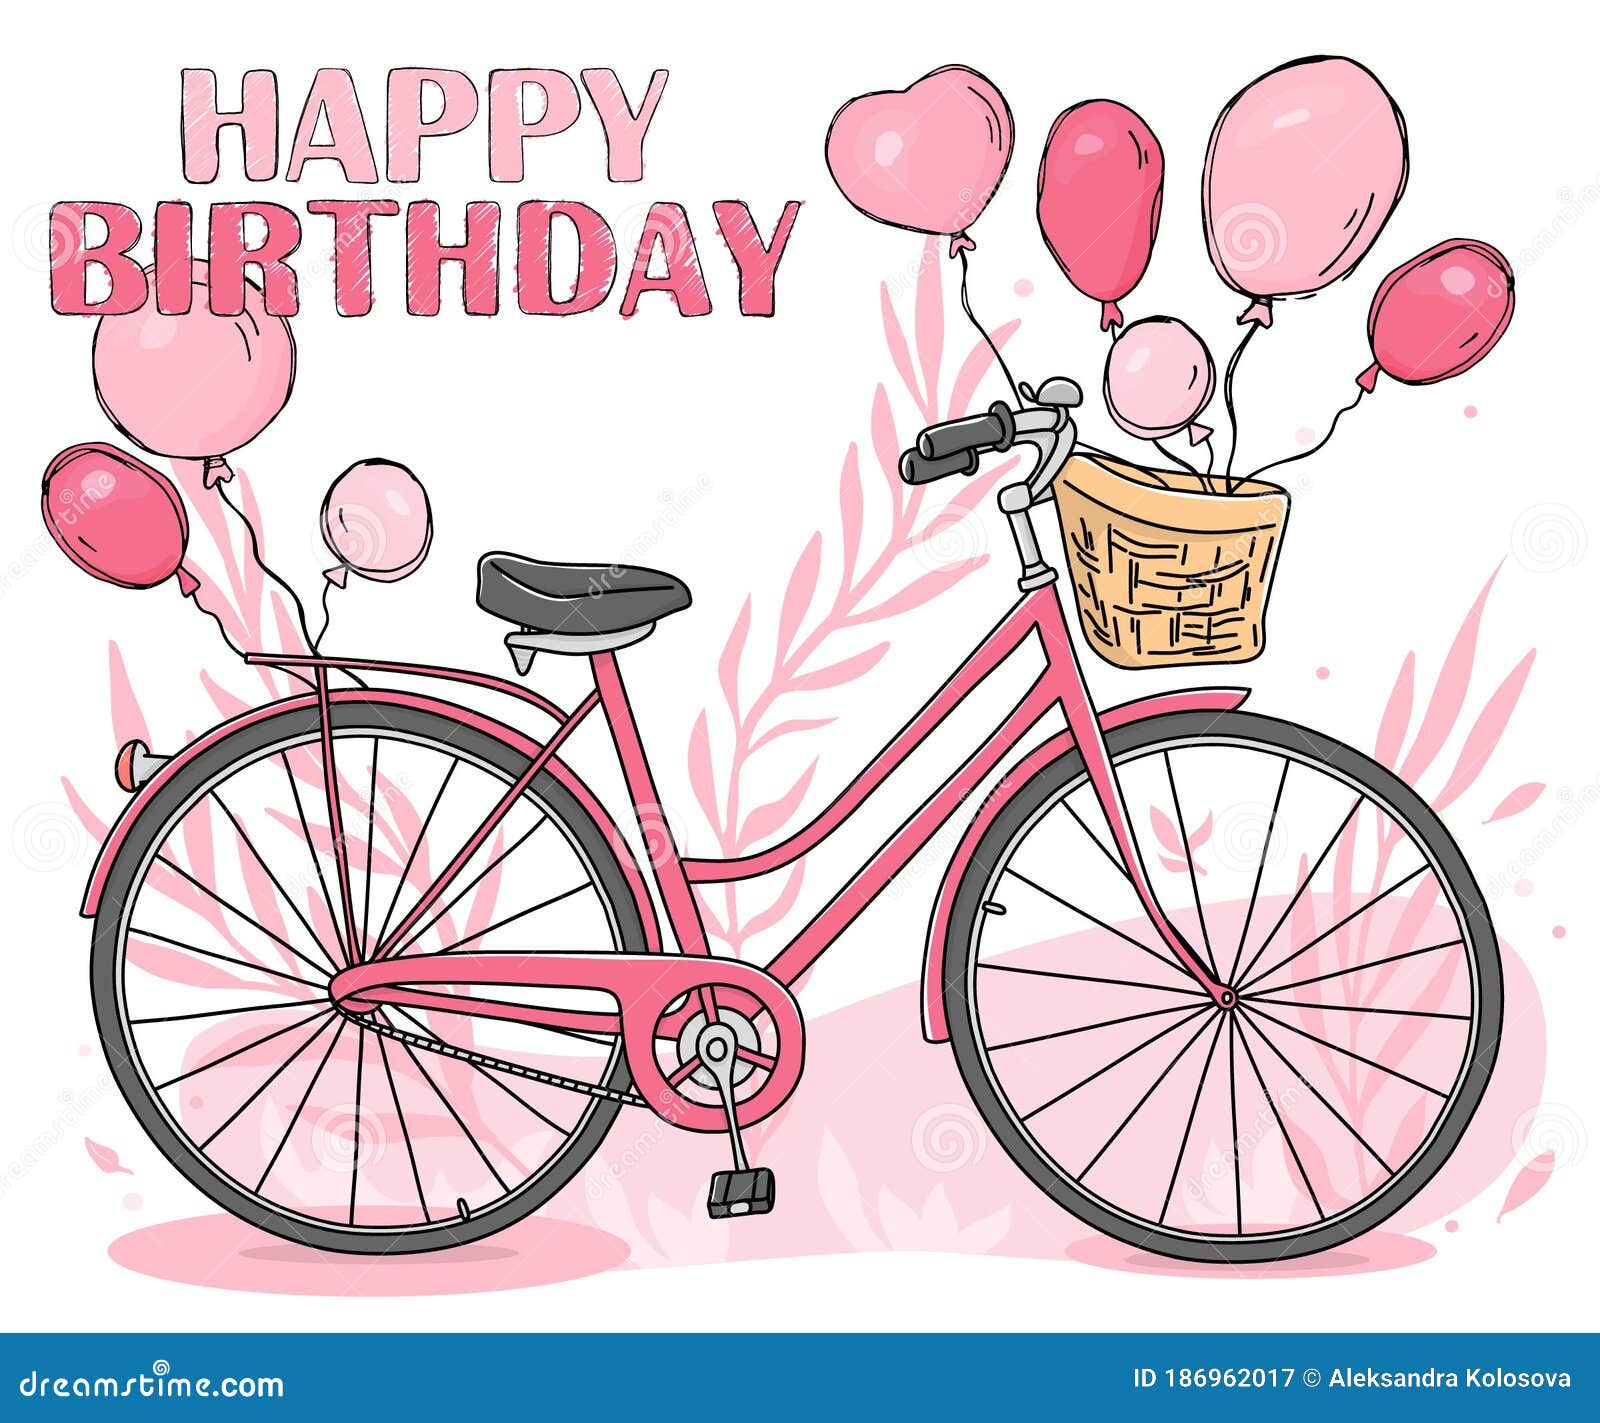 Birthday Greeting Card with Bicycle and Balloons. Stock Vector ...